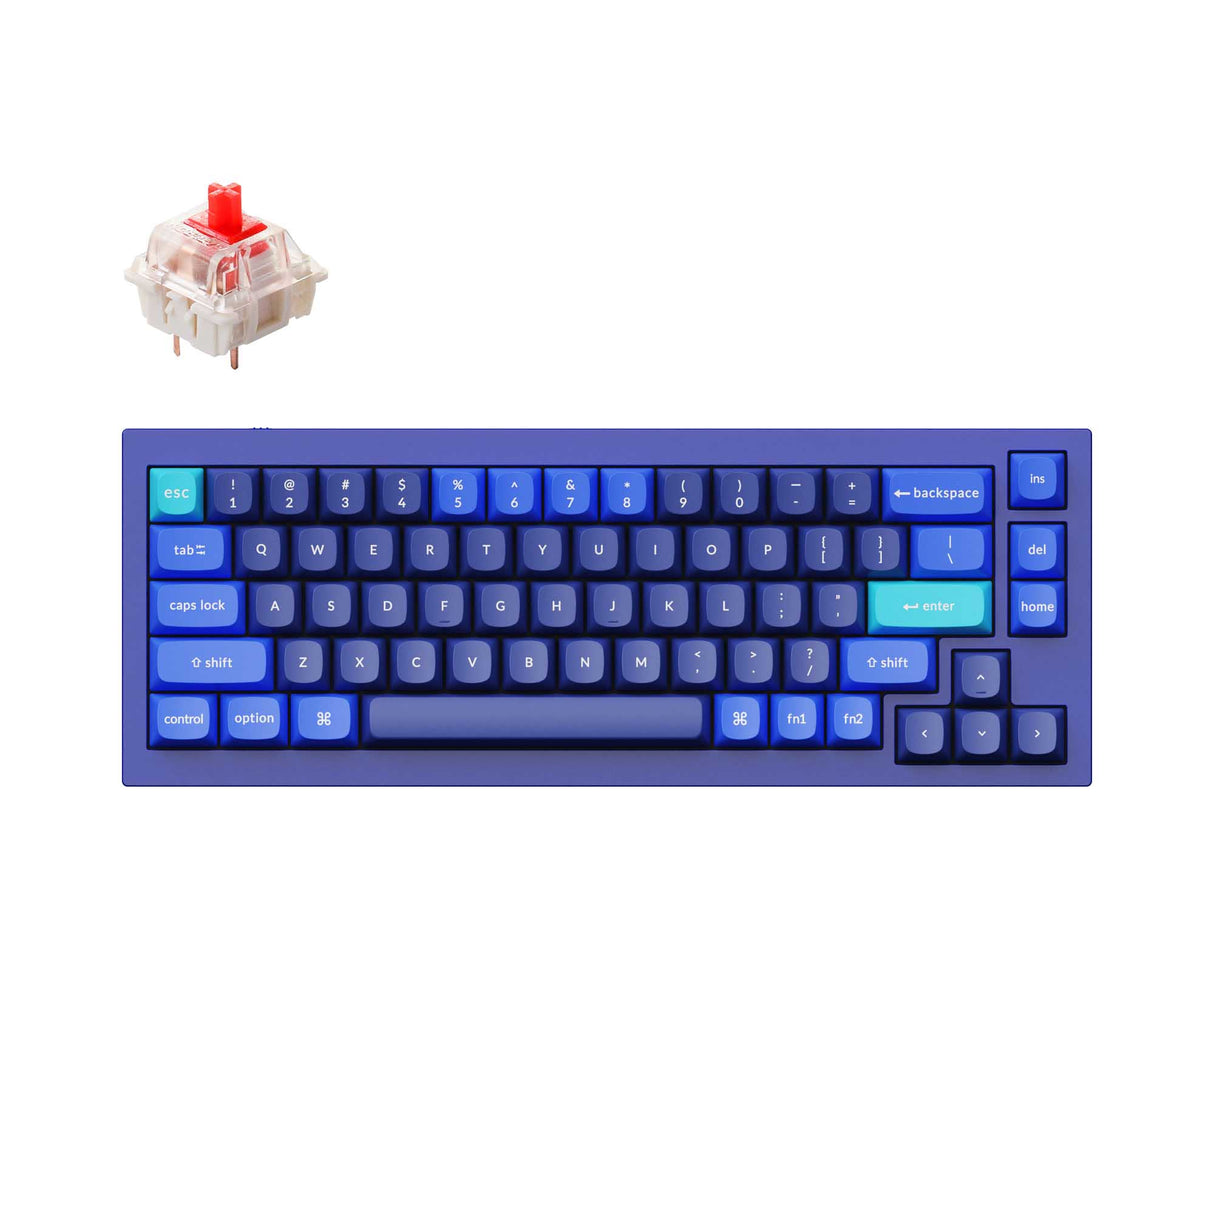 Keychron Q2 QMK VIA custom mechanical keyboard 65 percent layout full aluminum blue frame for Mac Windows iOS RGB backlight with hot swappable Gateron G Pro switch red